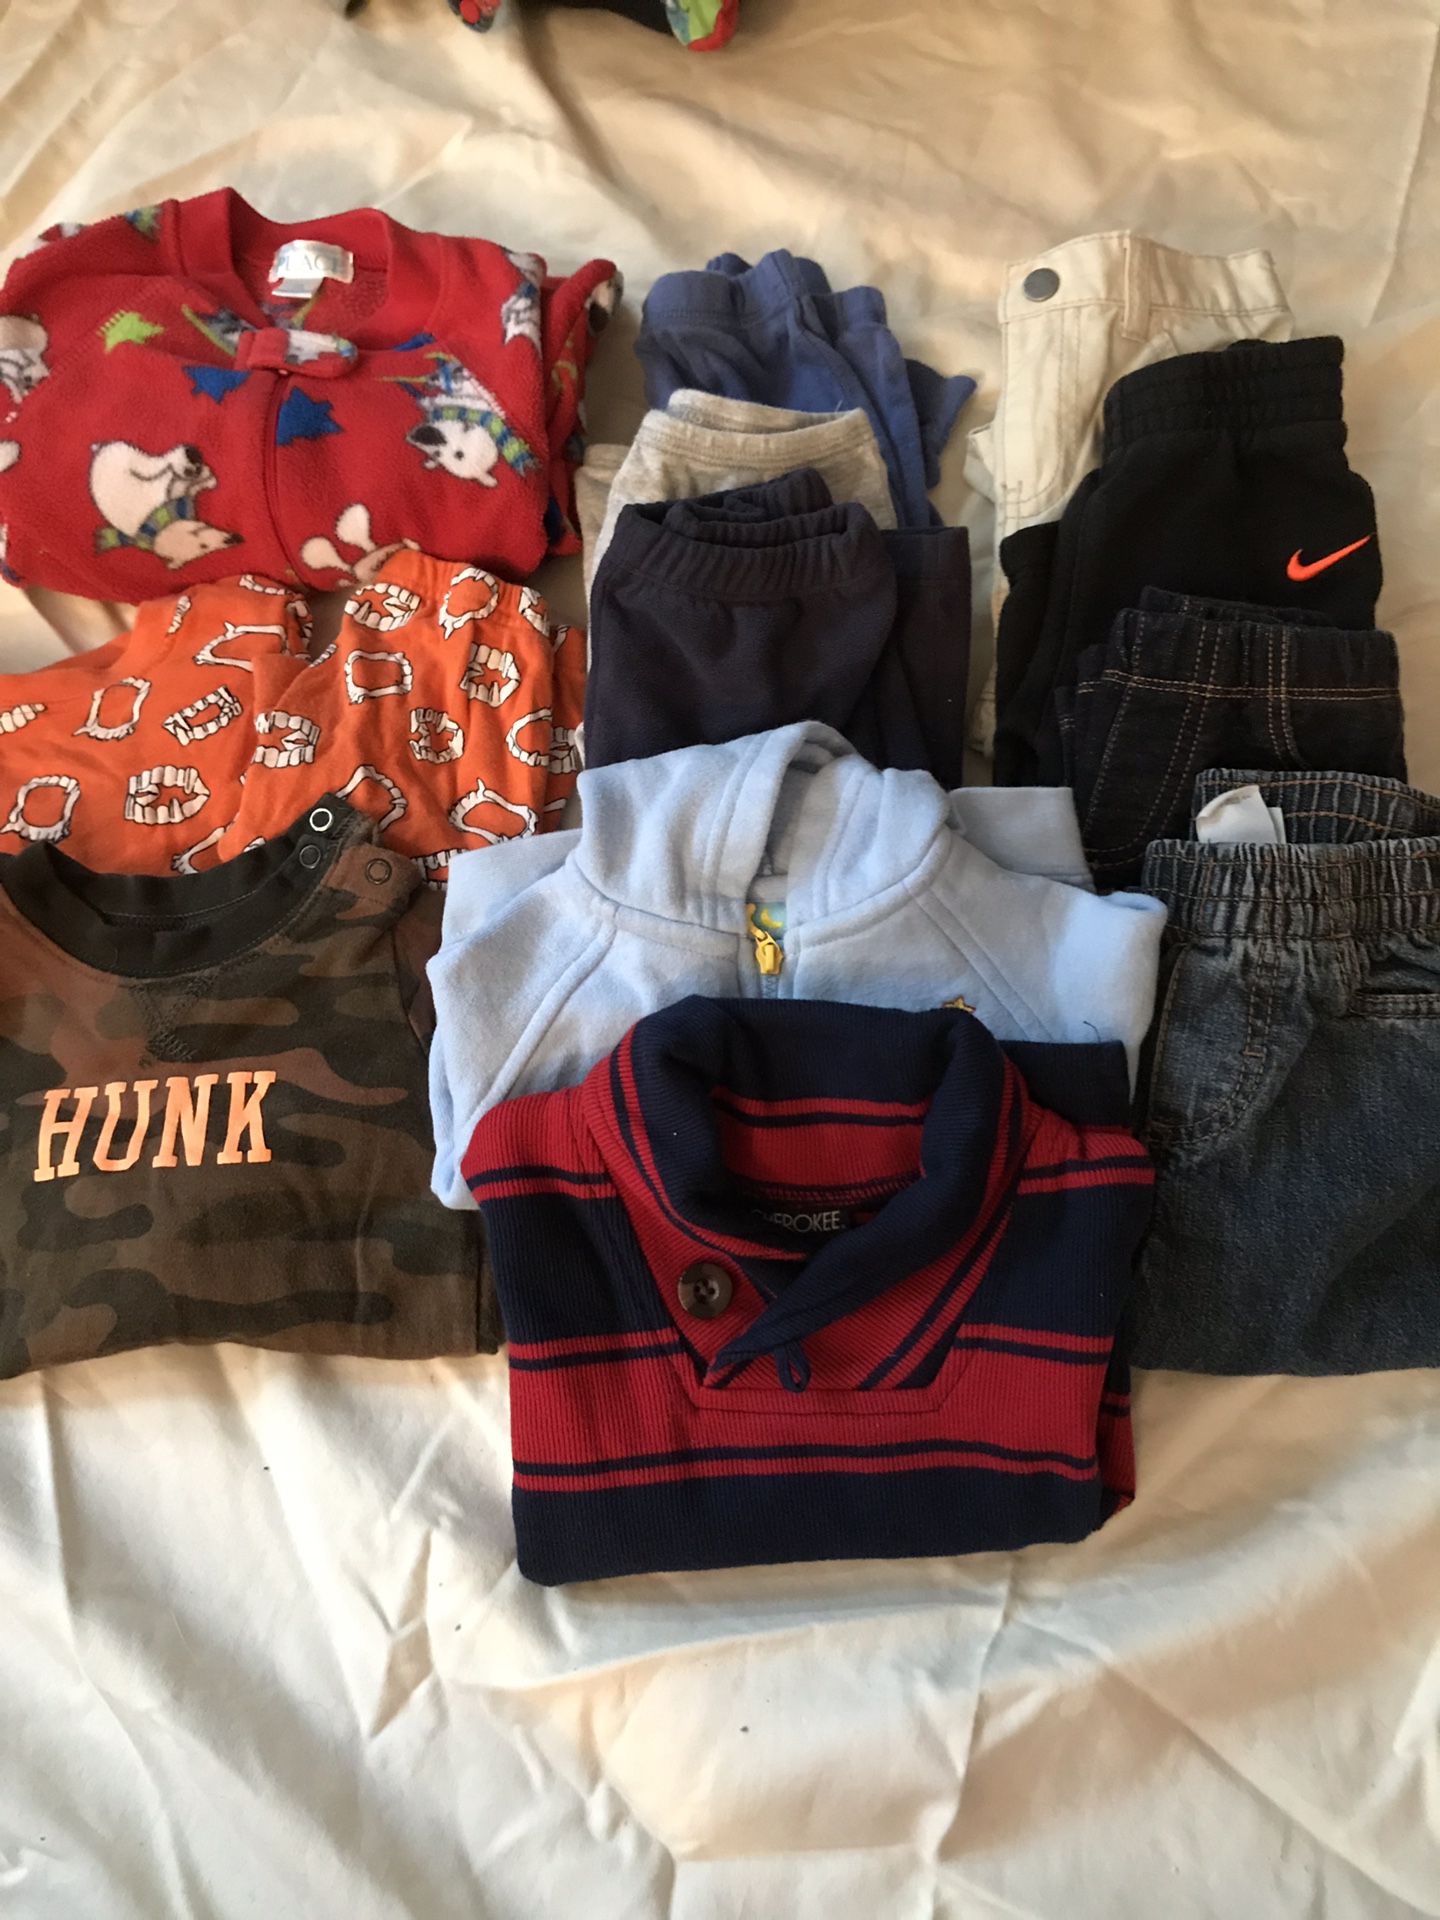 Boys 12 month size winter clothes